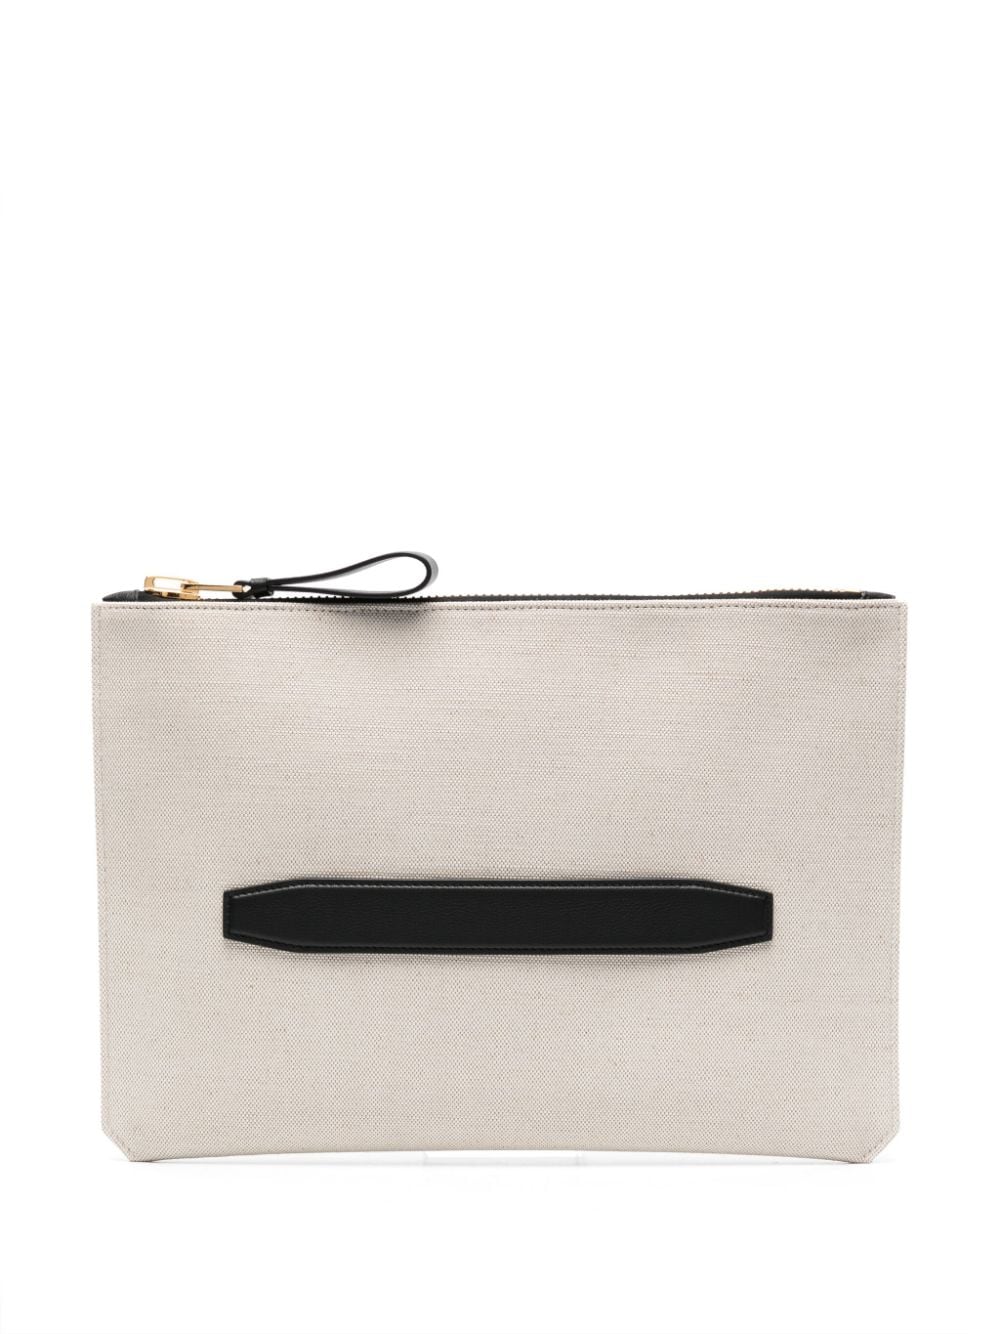 Tom Ford Buckley Canvas Clutch Bag In Neutrals